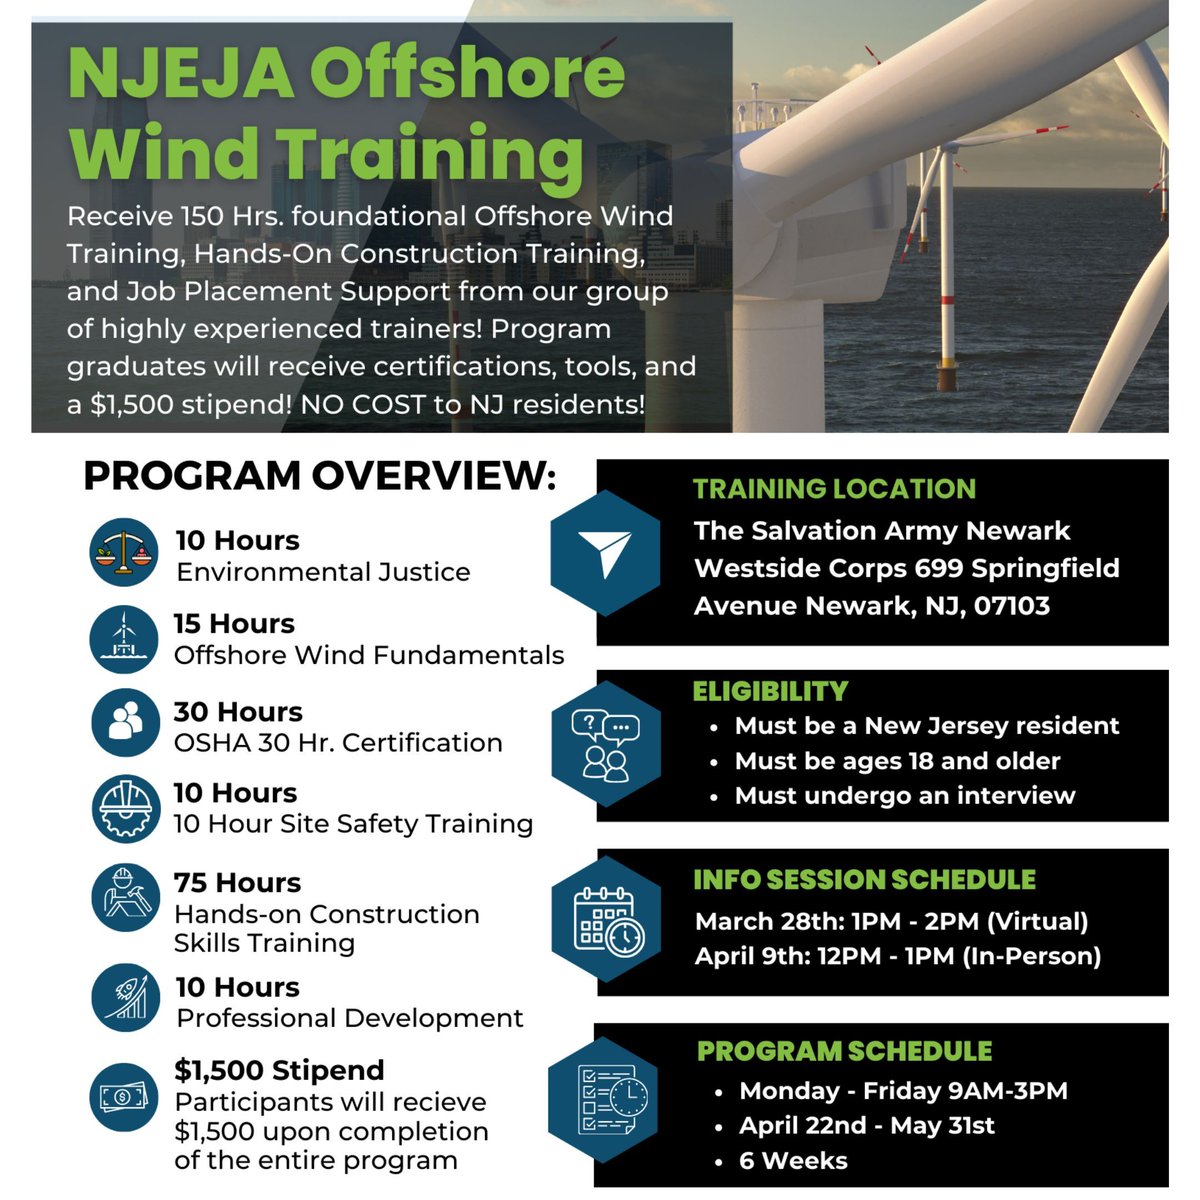 🗓 Save the Date: Learn more about our Offshore Wind Training Program by registering for tomorrow's info session. RSVP: tinyurl.com/NJEJAOSW